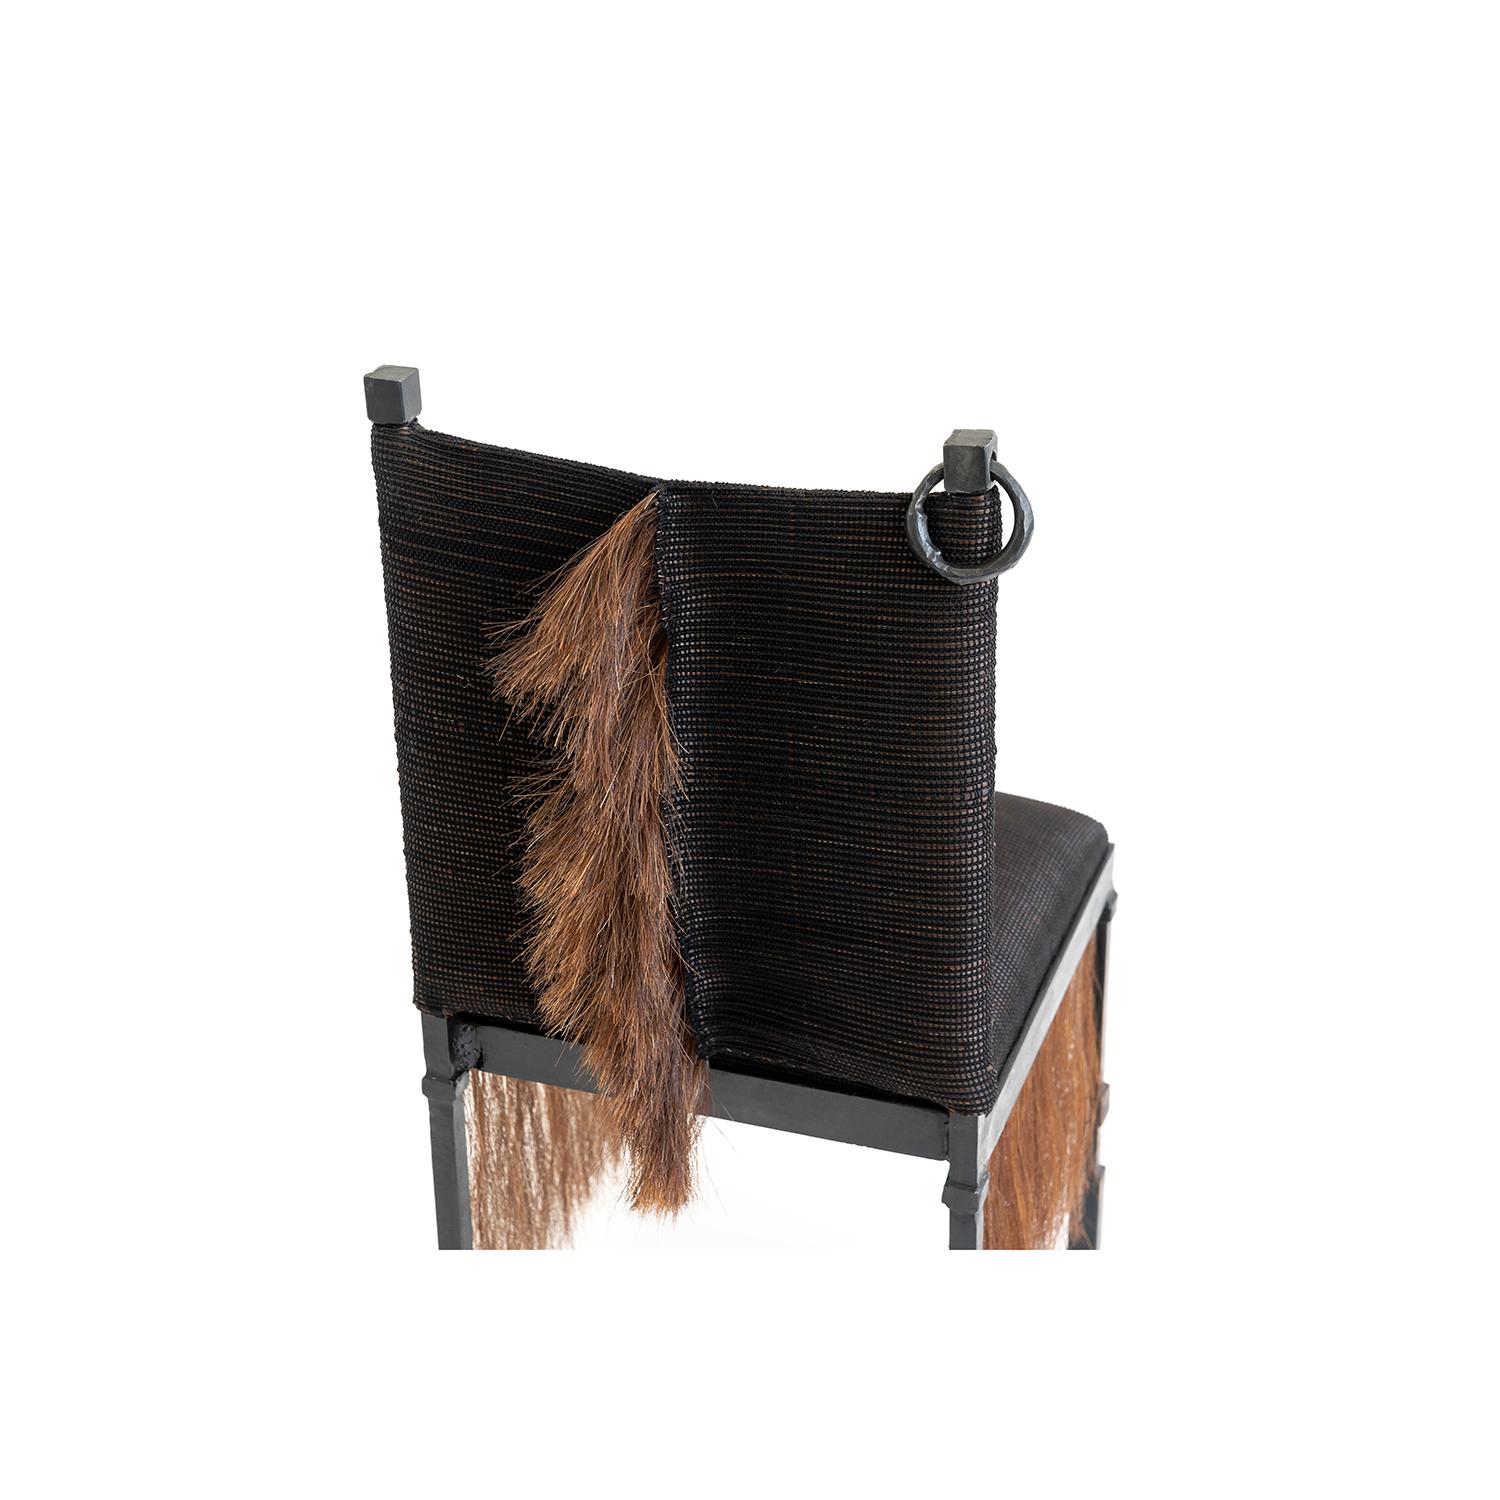 HORSE HAIR CHAIR NO. 1 
J.M. Szymanski
d. 2017

Contemporary furniture at its finest. Horsehair textile and blackened iron are combined to create an exciting juxtaposition of elements. Available in creme, brown, and black. 

Custom sizes available.